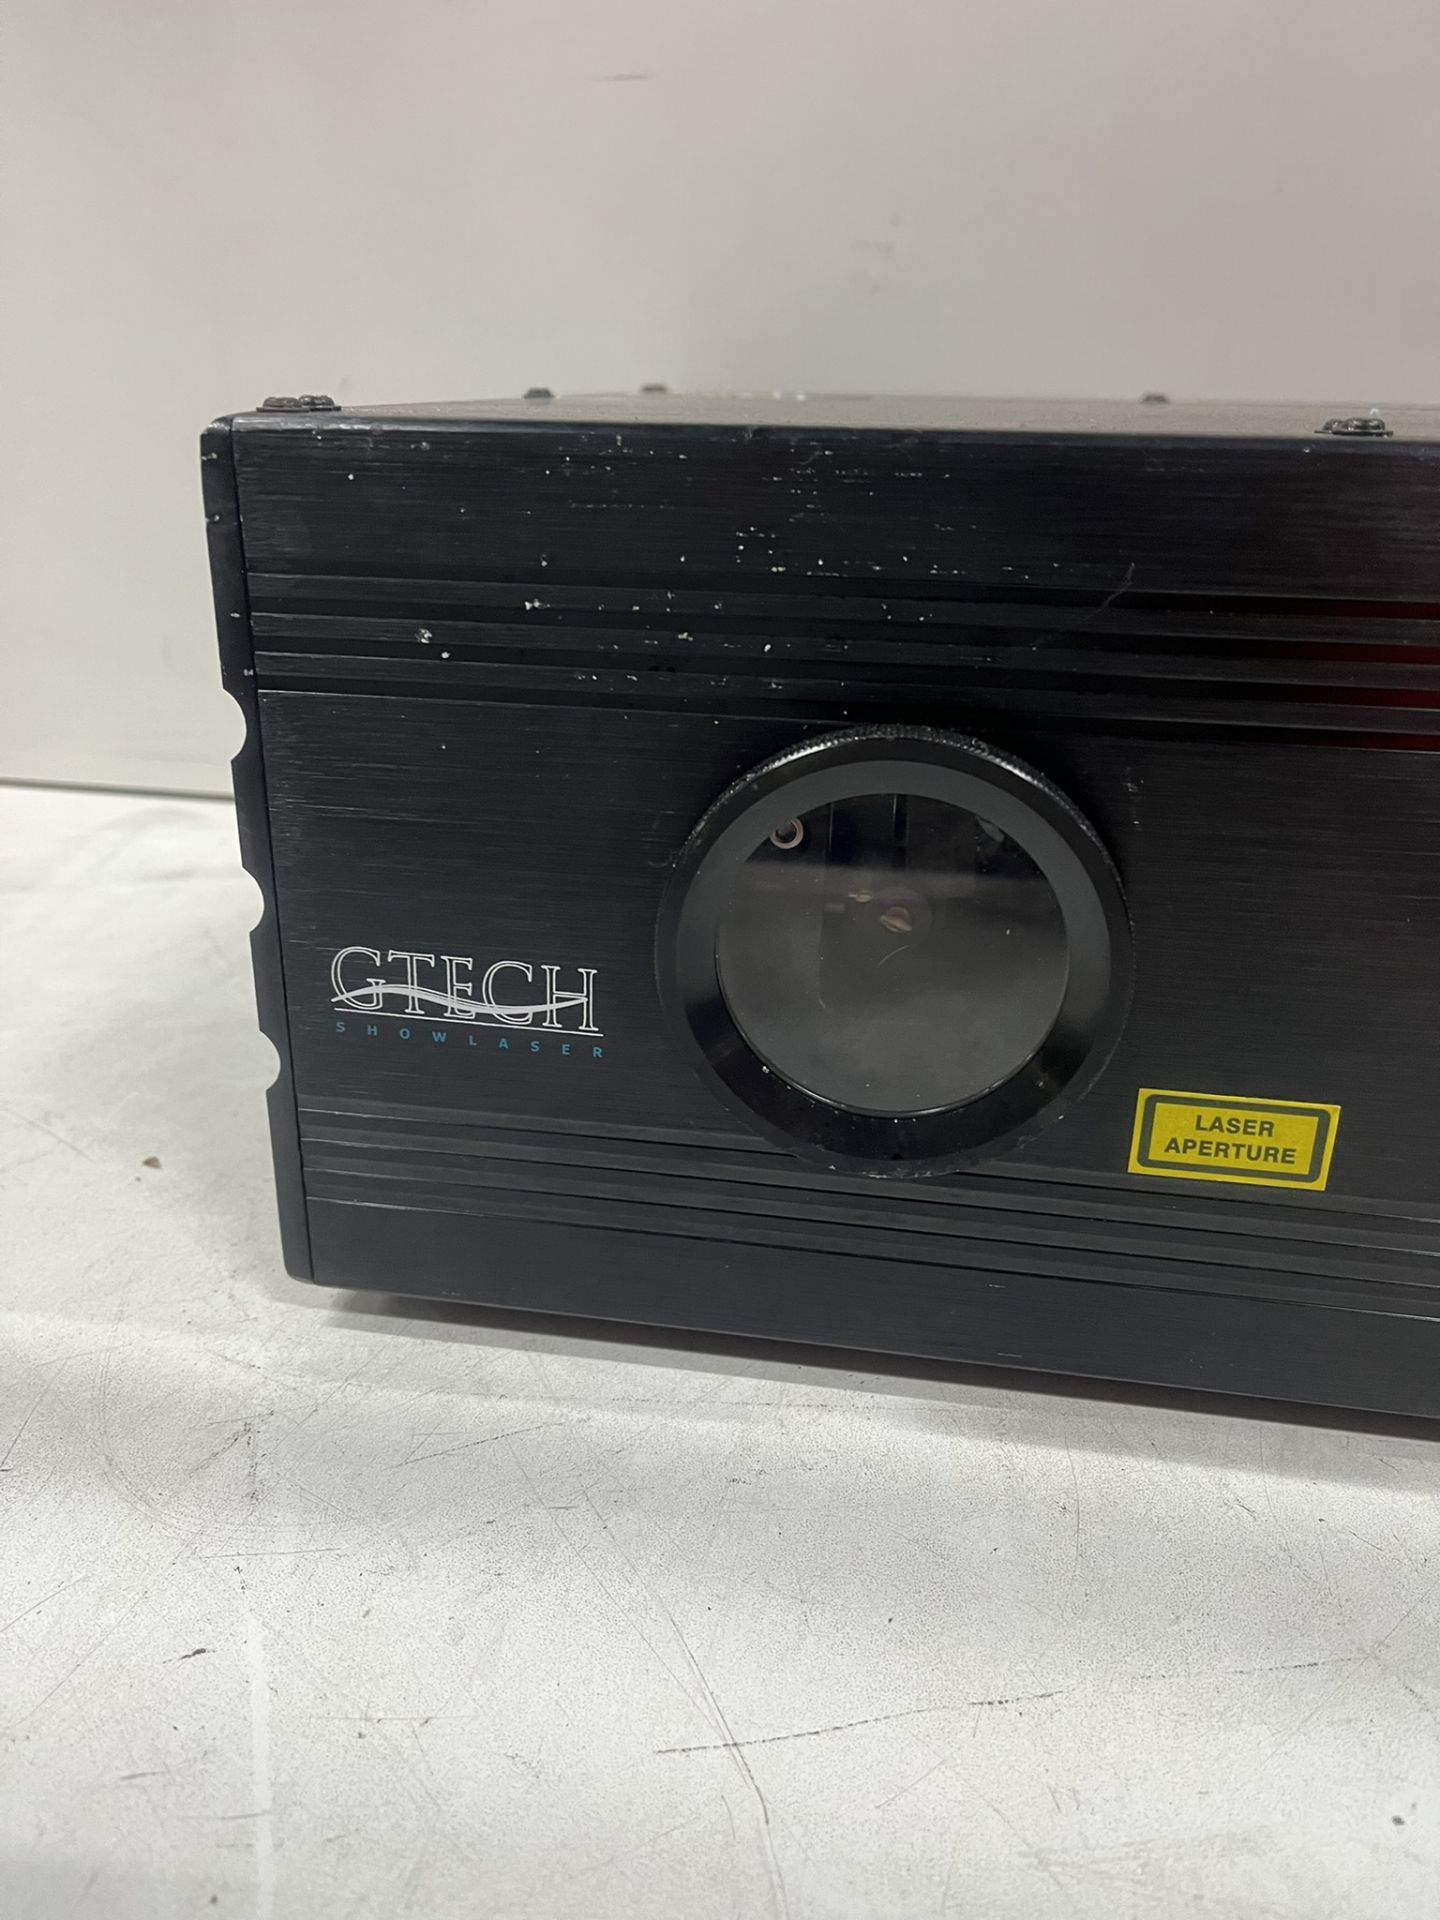 Gtech Highlase 300RGY Showlaser - Image 3 of 7